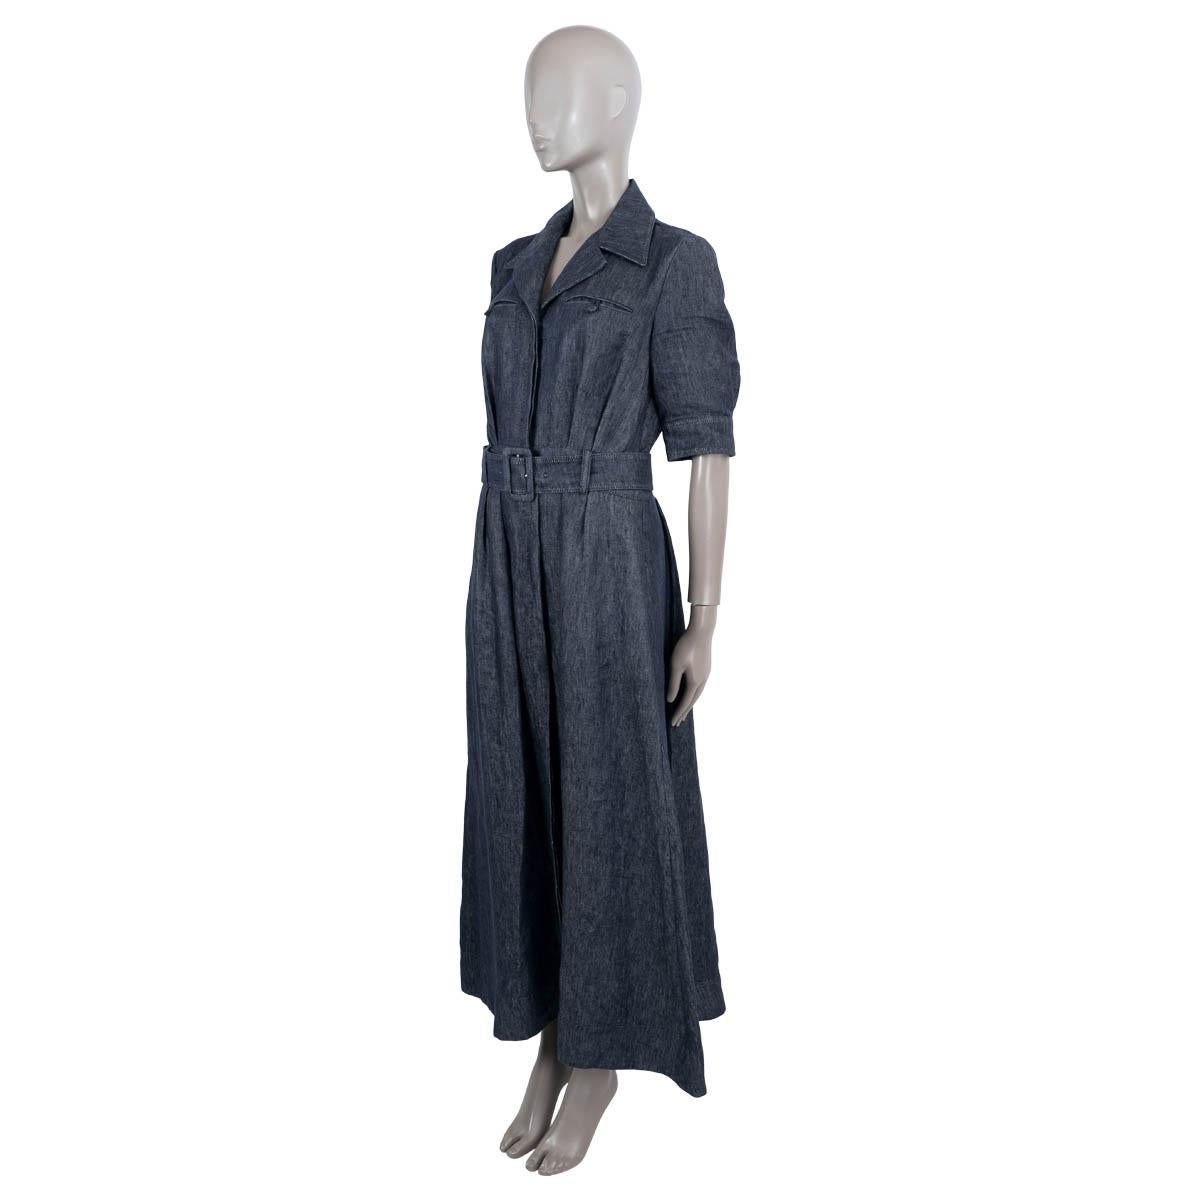 100% authentic Gabriela Hearst Simone maxi shirt dress in dark navy blue linen (100%). Features a pointed collar, short sleeves, two chest pockets and matching fabric belt. Has been worn and is in excellent condition. 

2022